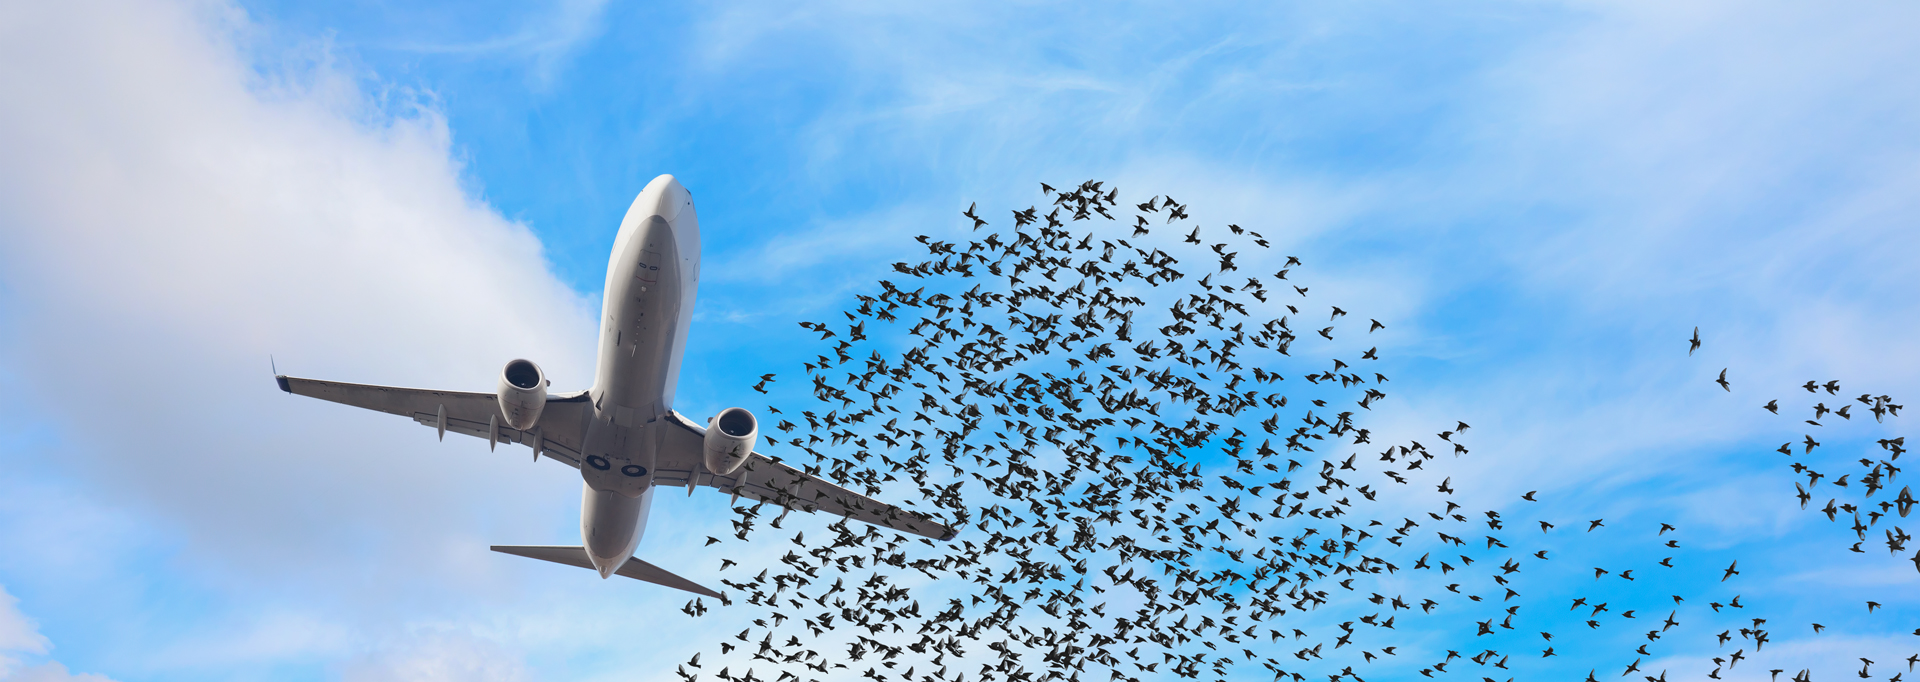 AIRPLANE surrounded by birds